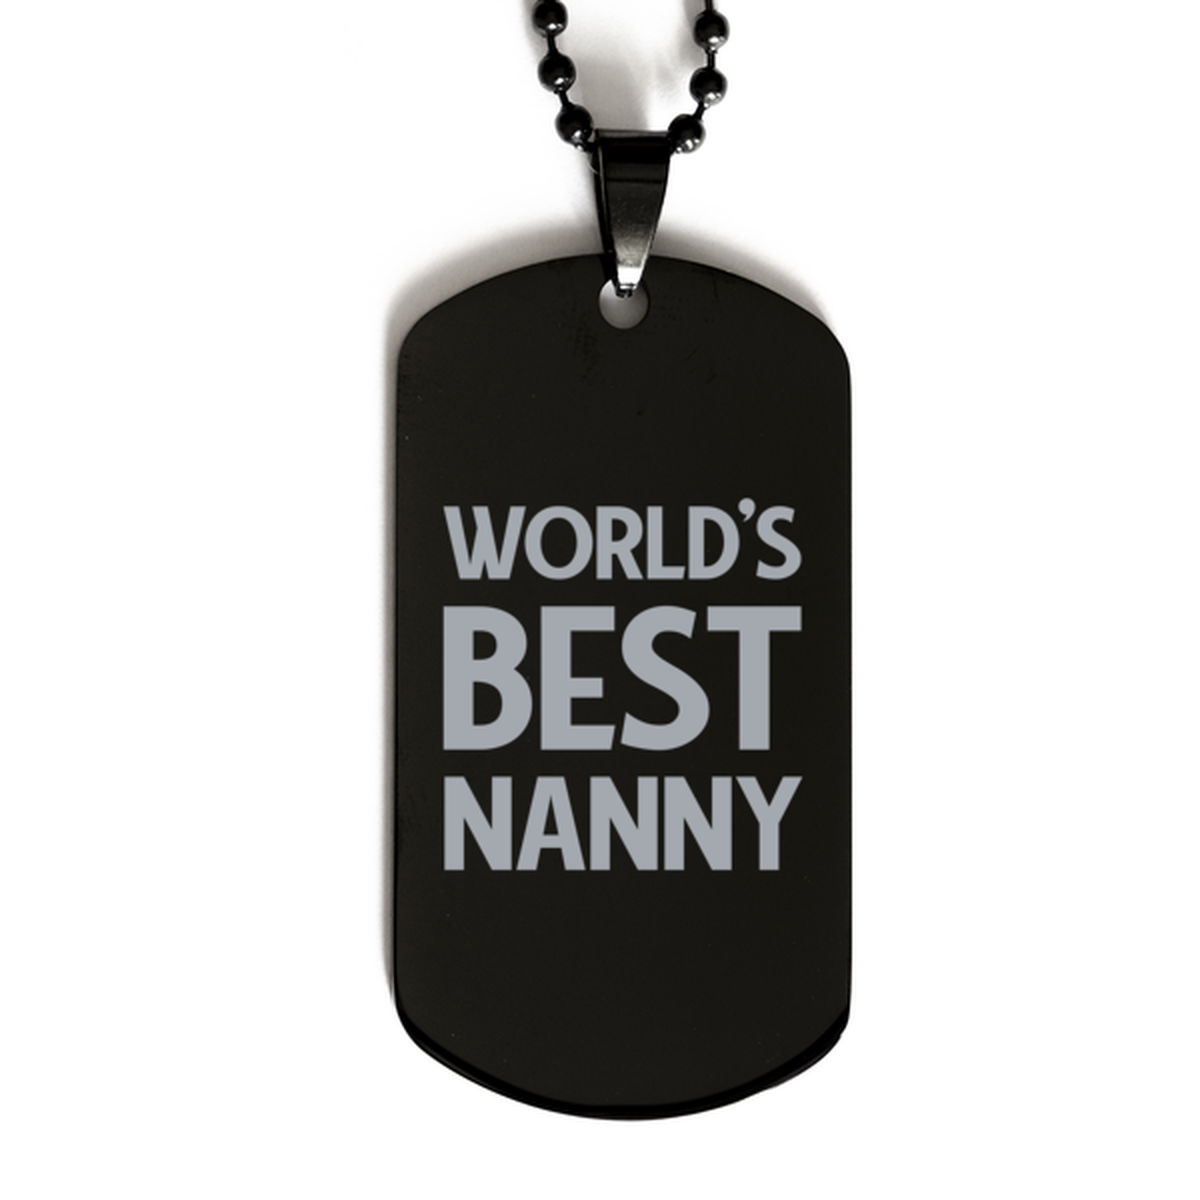 Worlds Best Nanny Gifts, Funny Black Engraved Dog Tag For Nanny, Birthday Presents For Women